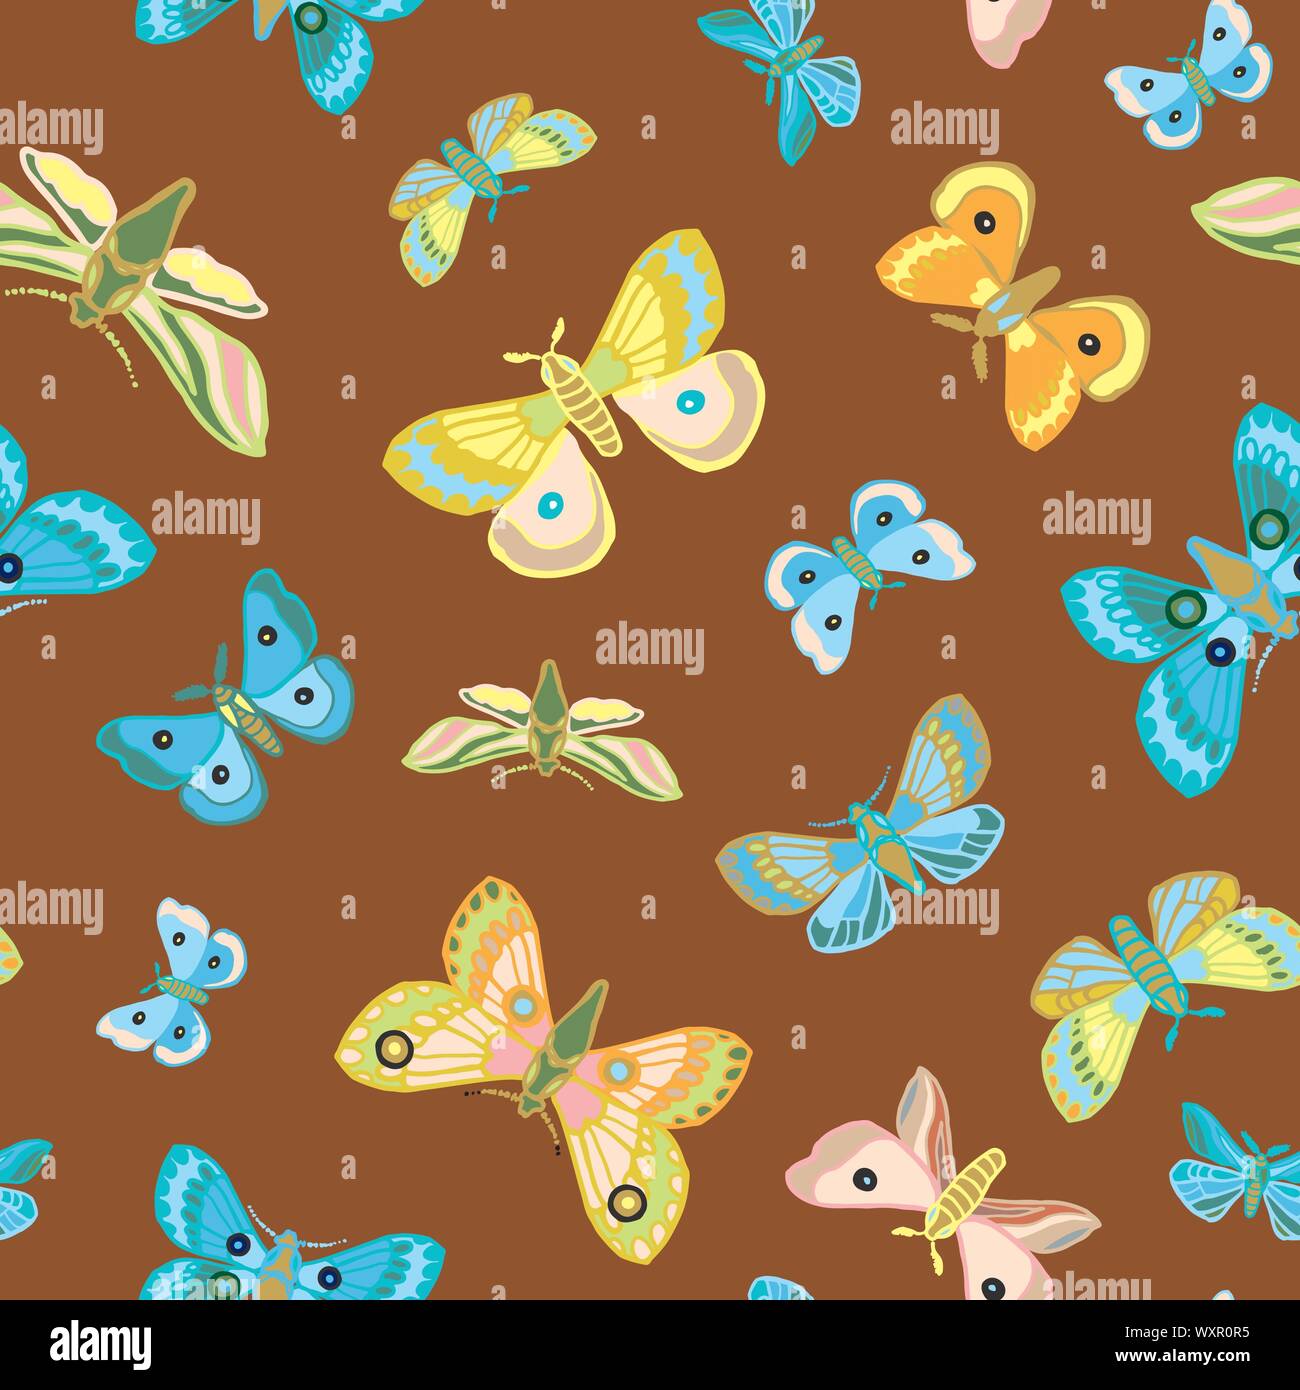 30 Cute Brown Aesthetic Wallpapers for Phone  Butterfly Assortment I Take  You  Wedding Readings  Wedding Ideas  Wedding Dresses  Wedding Theme